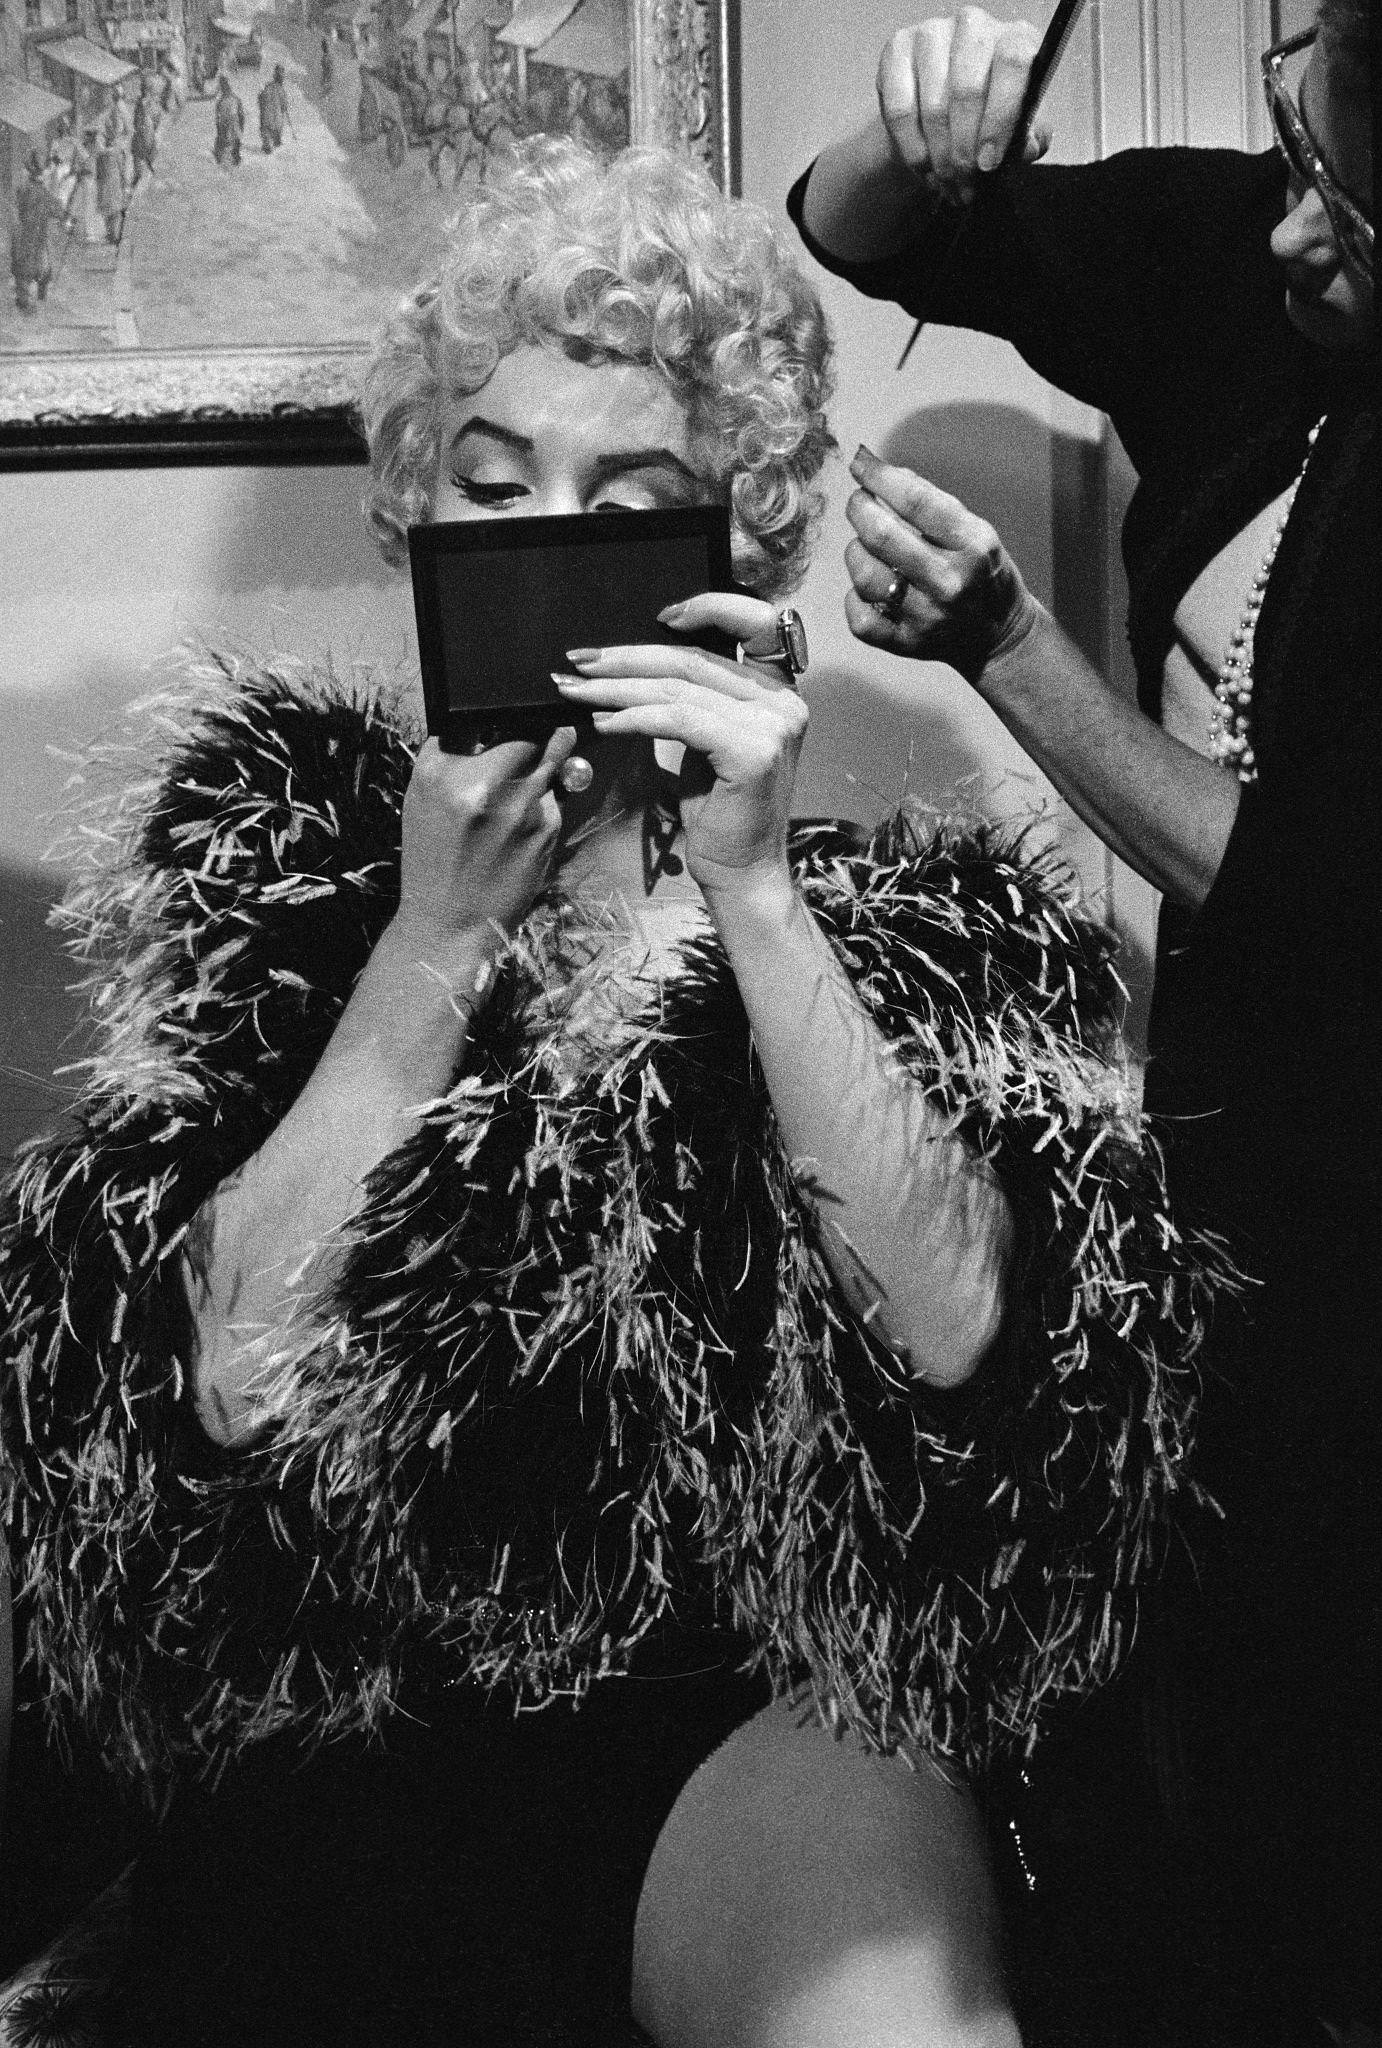 Marilyn Monroe wearing a feather boa puts on makeup to prepare for a scene during the filming of "The Seven Year Itch" in 1954